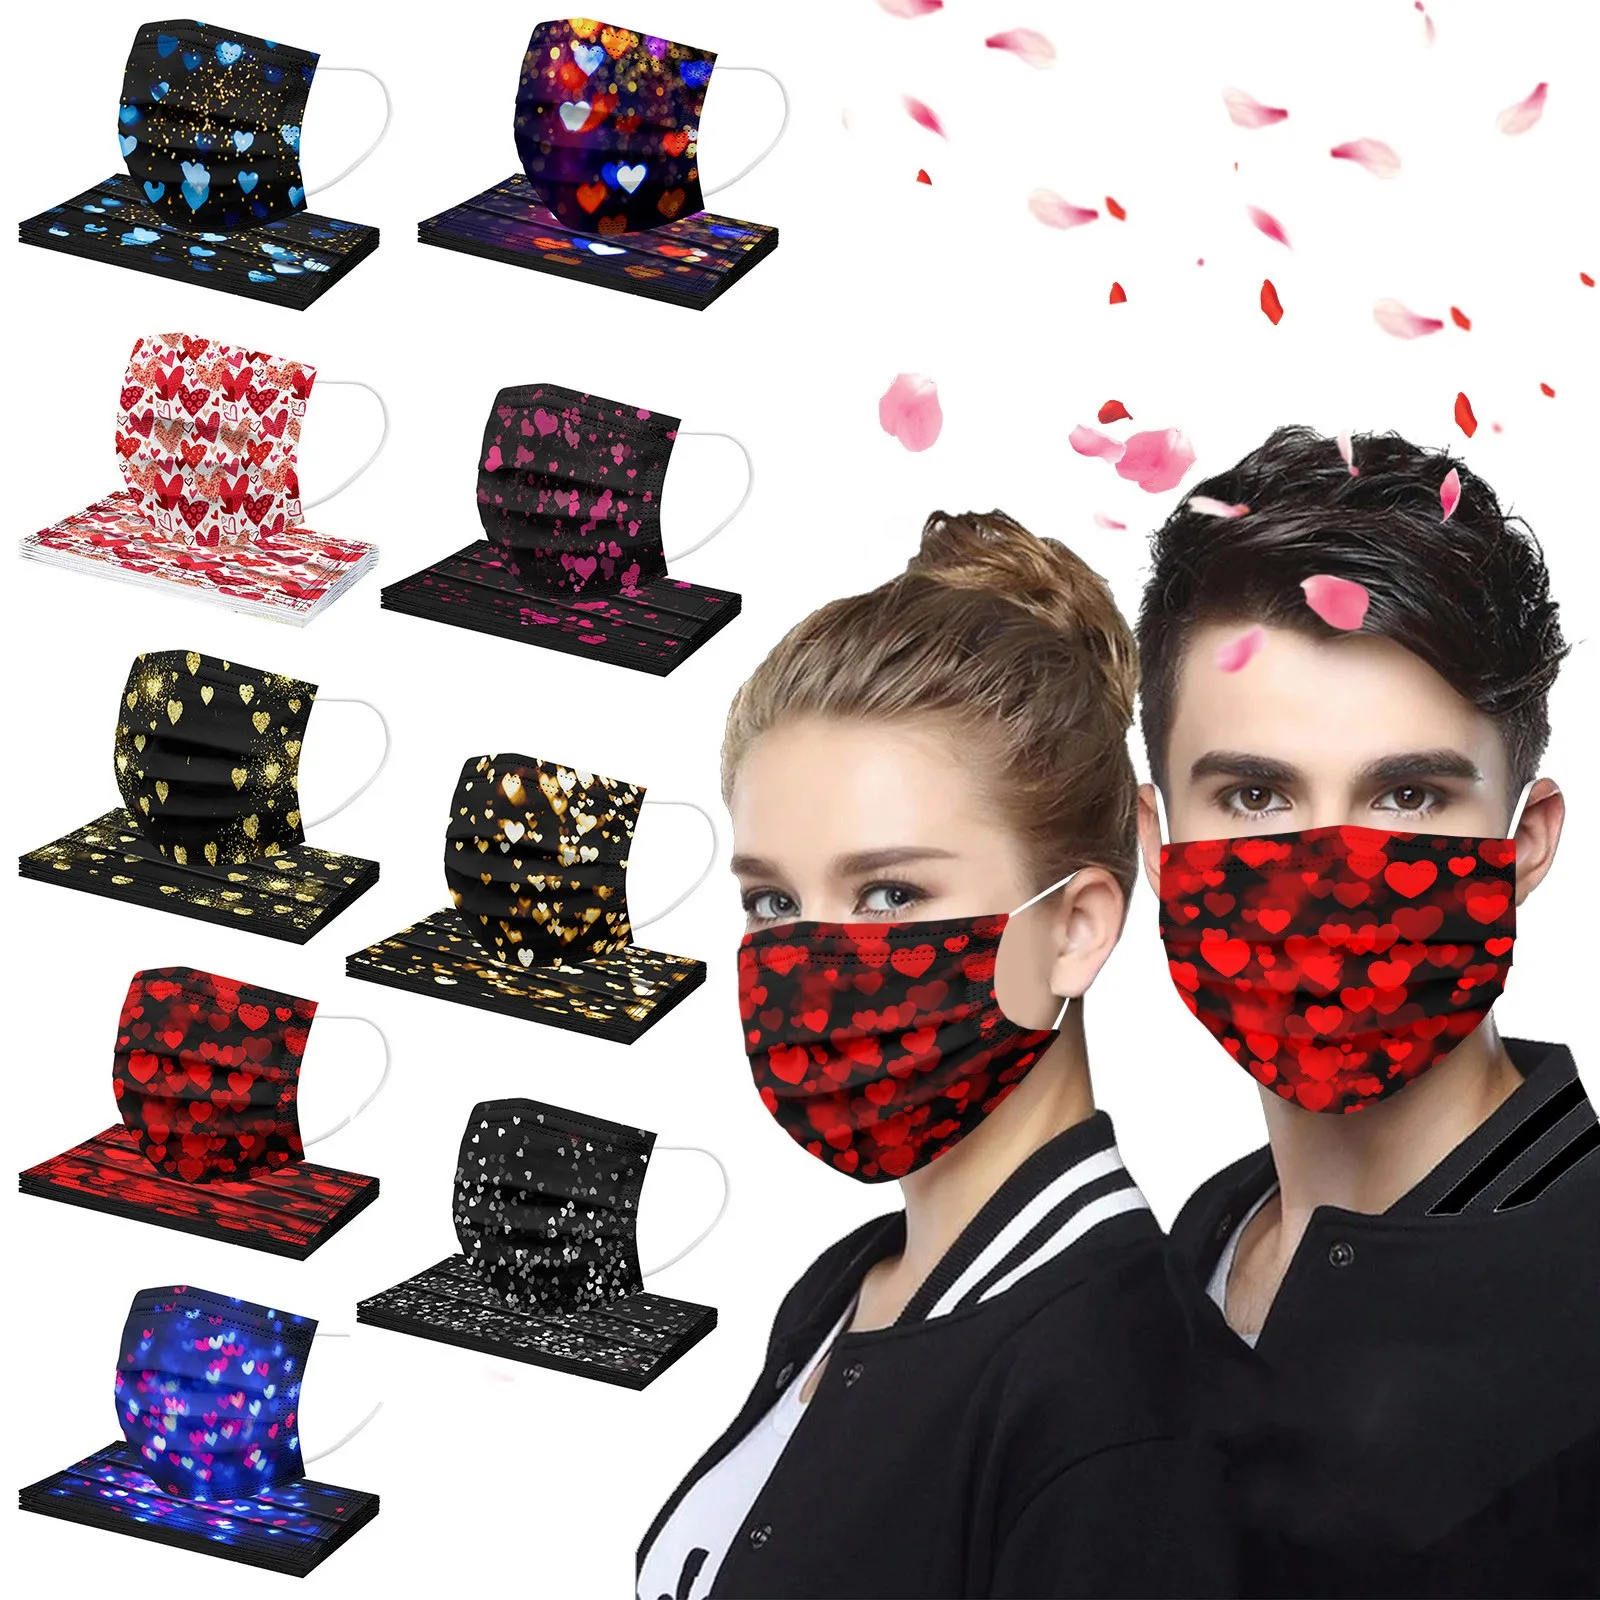 creative halloween costumes 10pc Mascarillas Valentine's Day Heart Facemask Adult Disposable Protective Mask 3ply Earloop Filter Mask Halloween Cosplay Mask funny adult halloween costumes